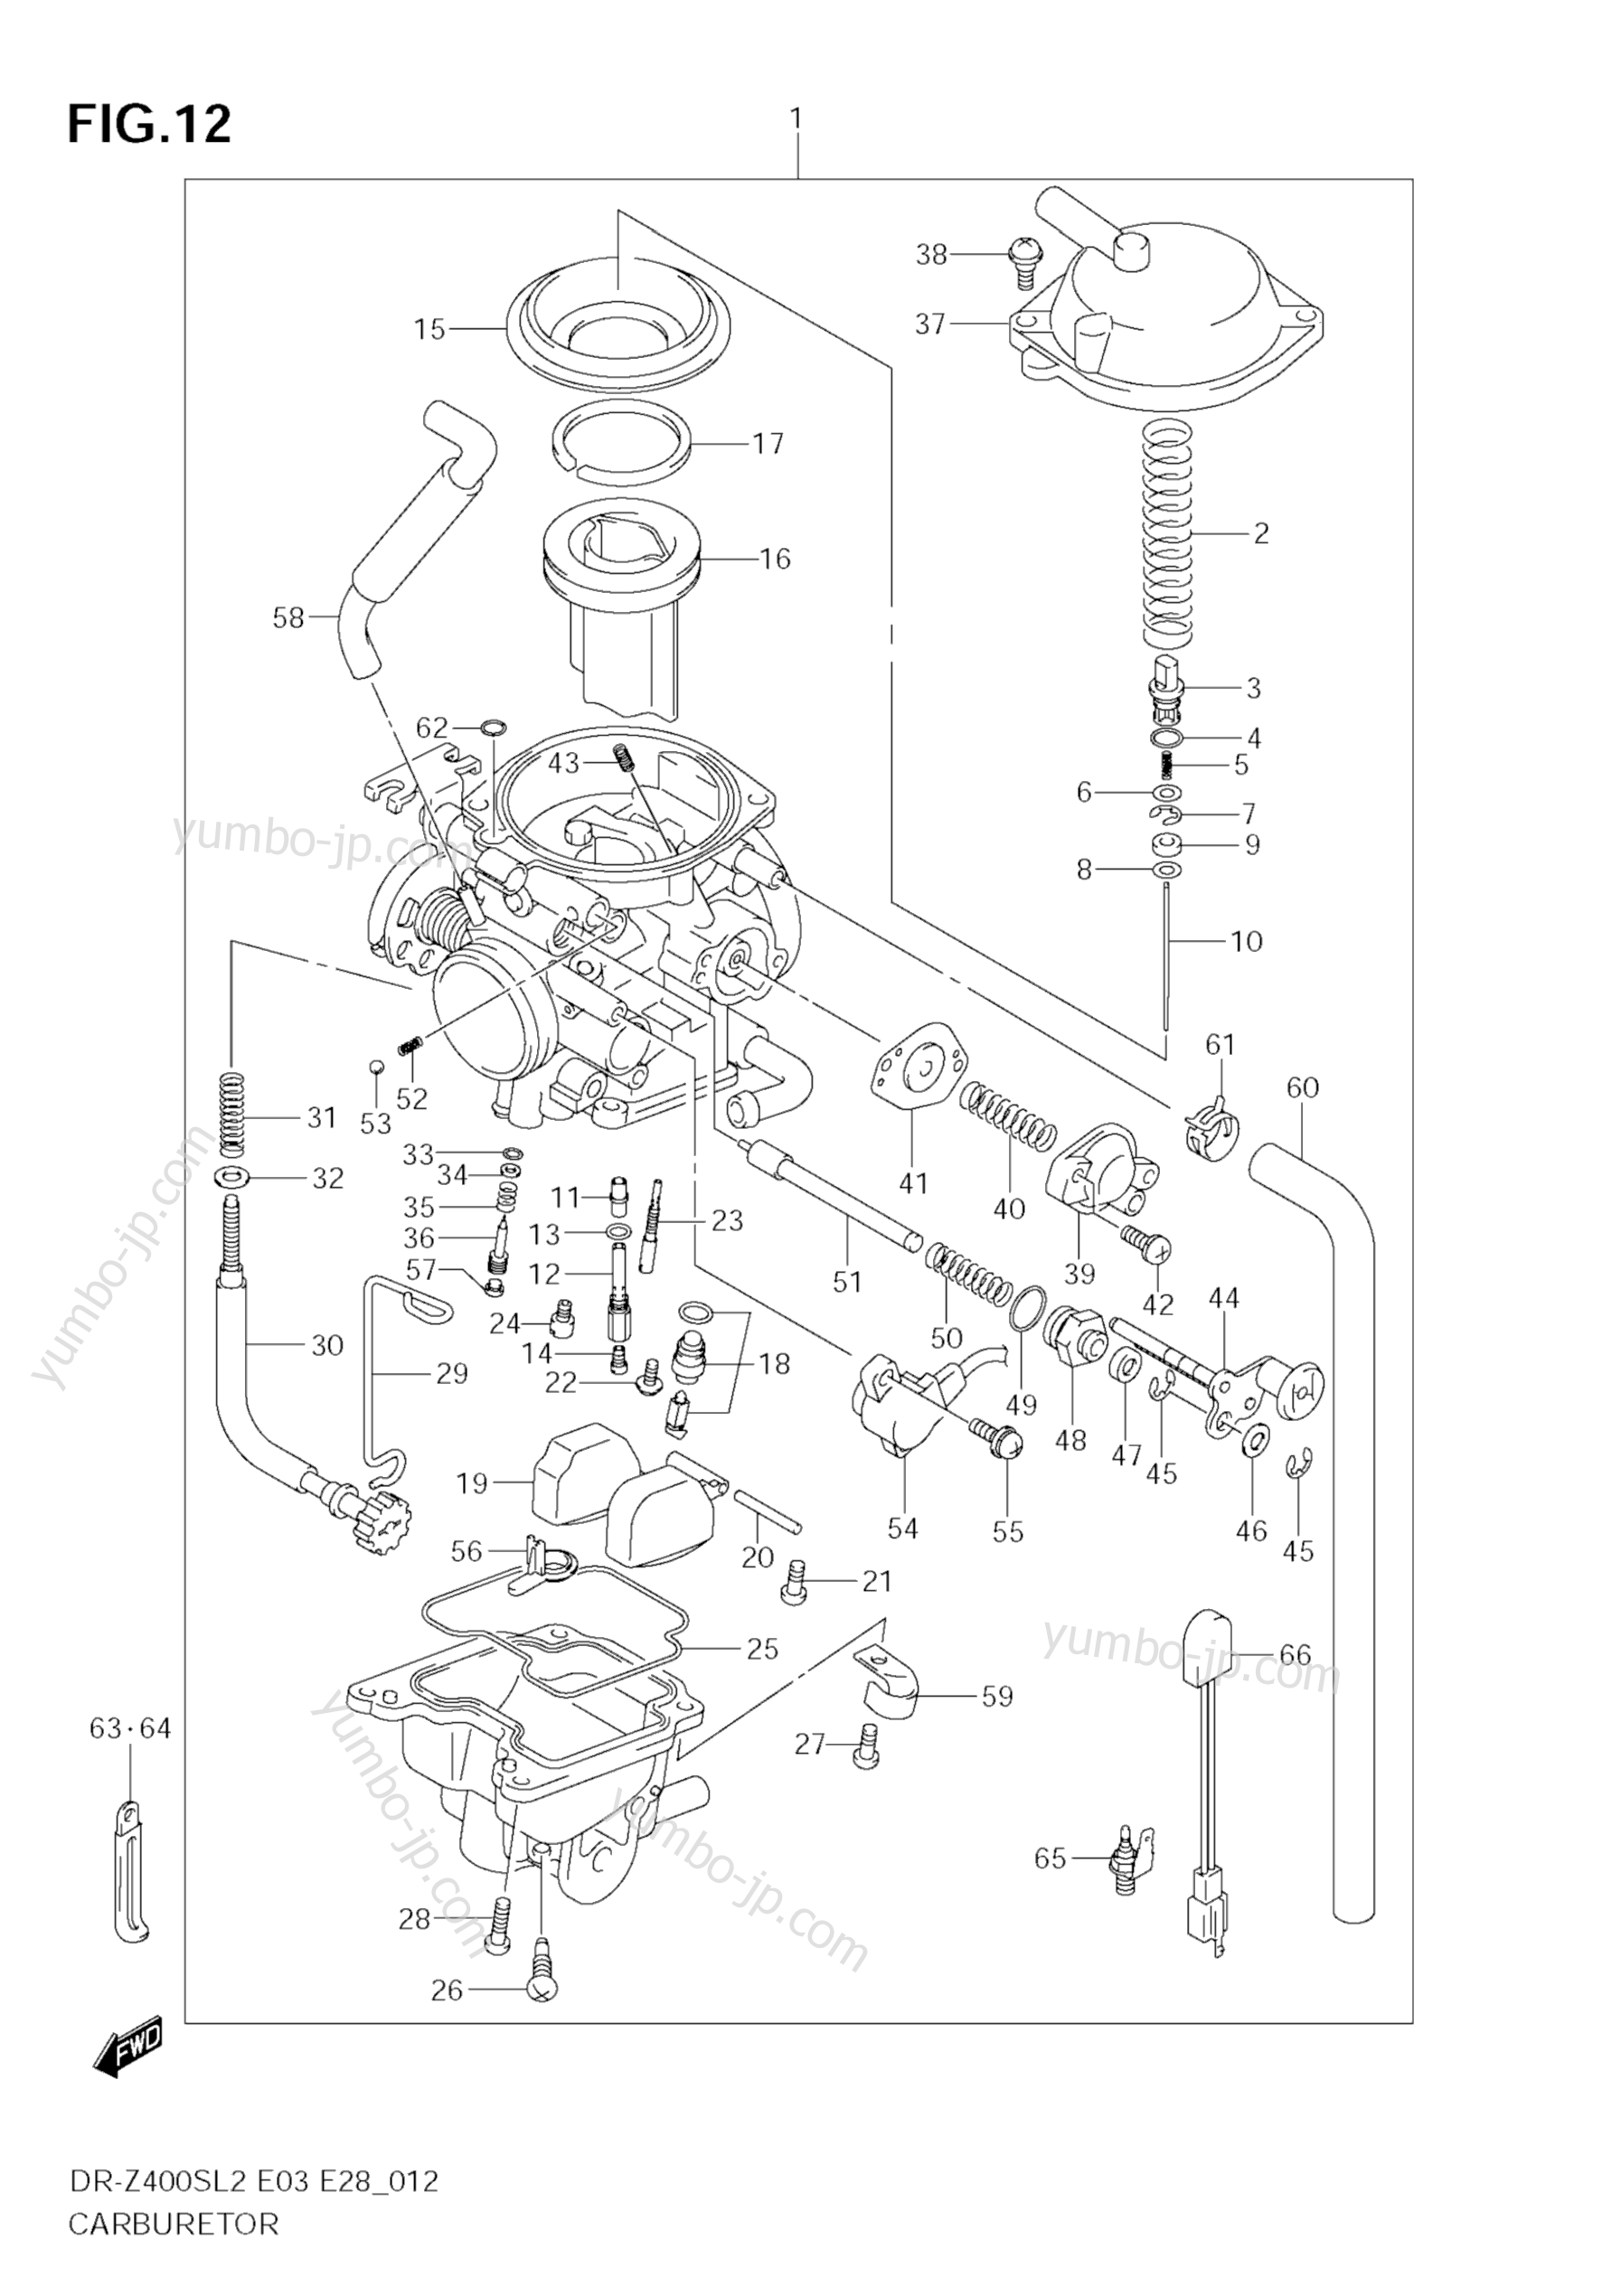 CARBURETOR (E03) for motorcycles SUZUKI DR-Z400S 2012 year